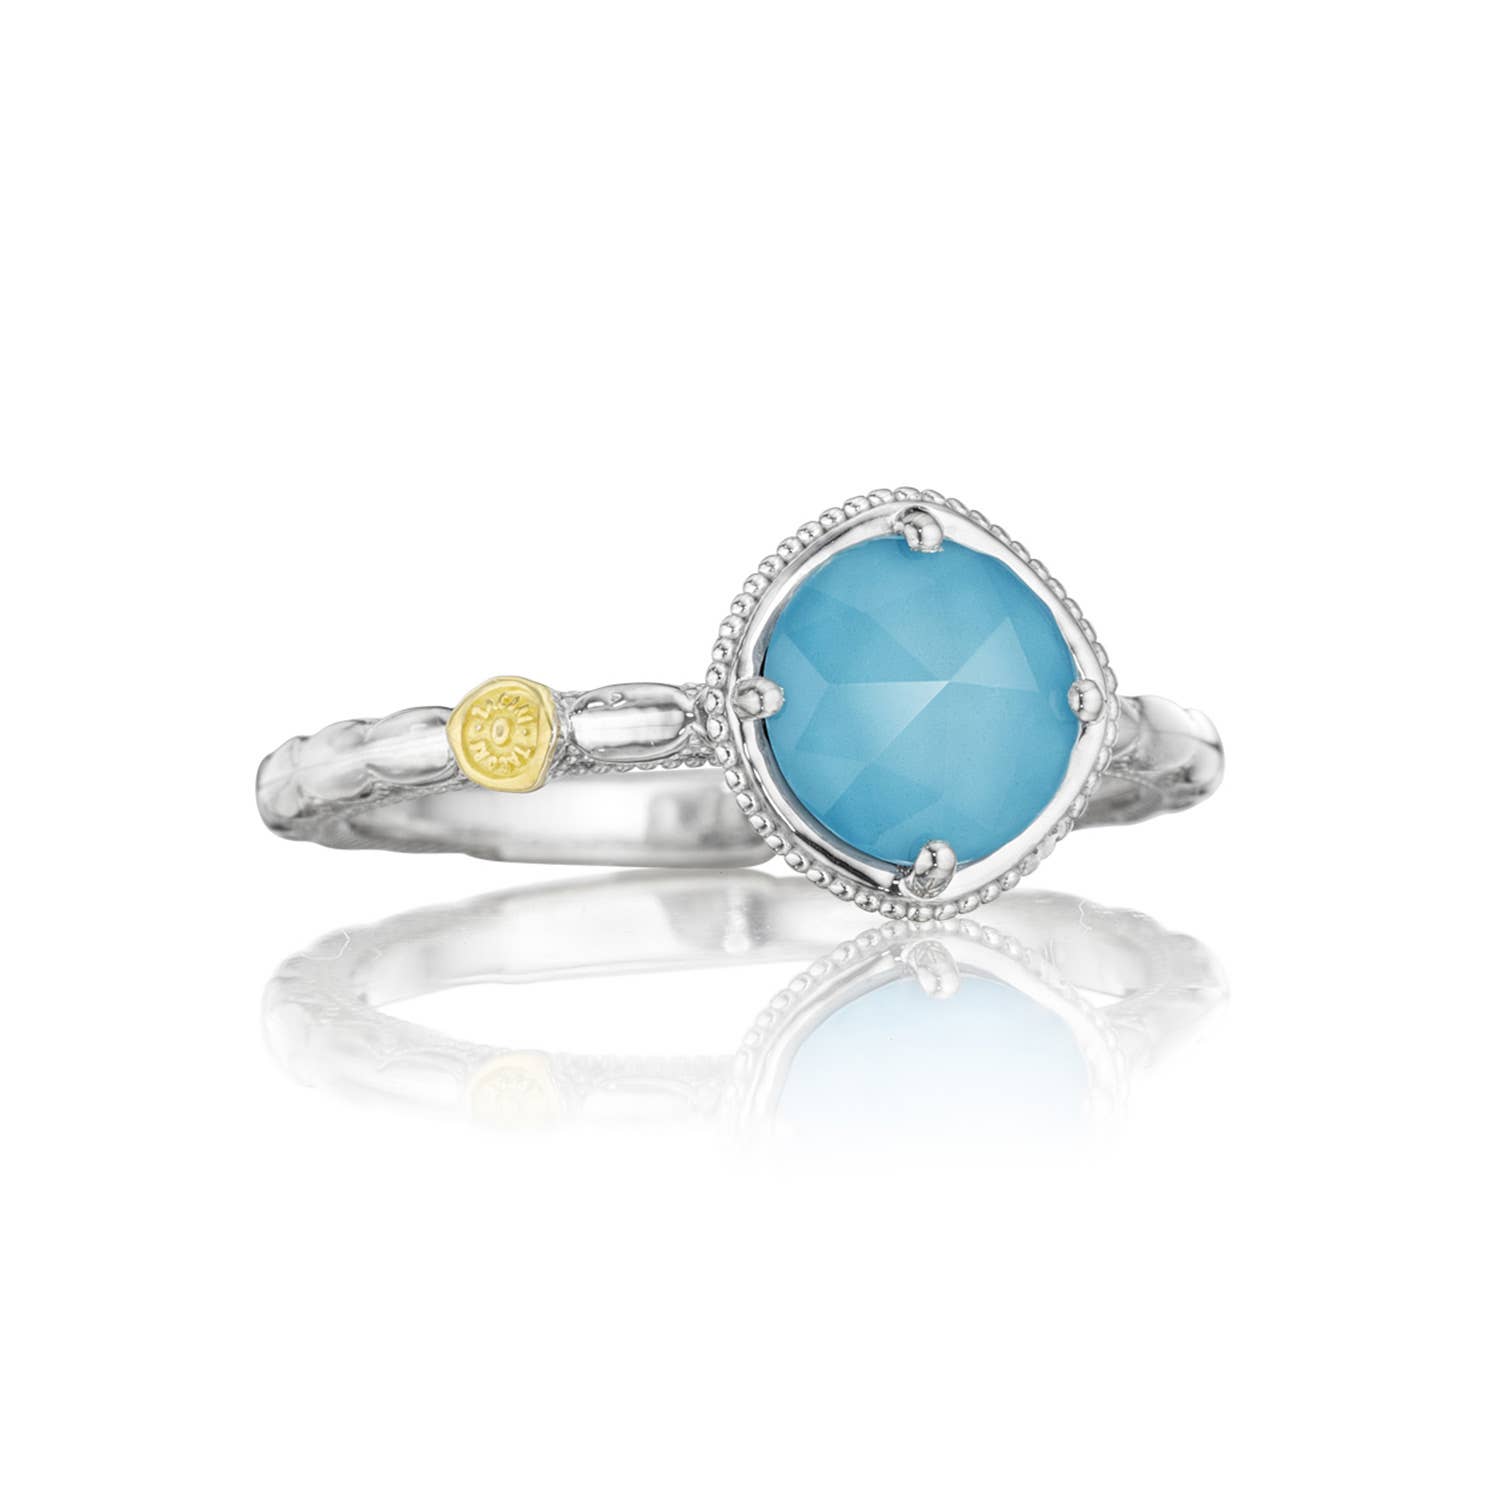 Simply Gem Ring featuring Neo-Turquoise